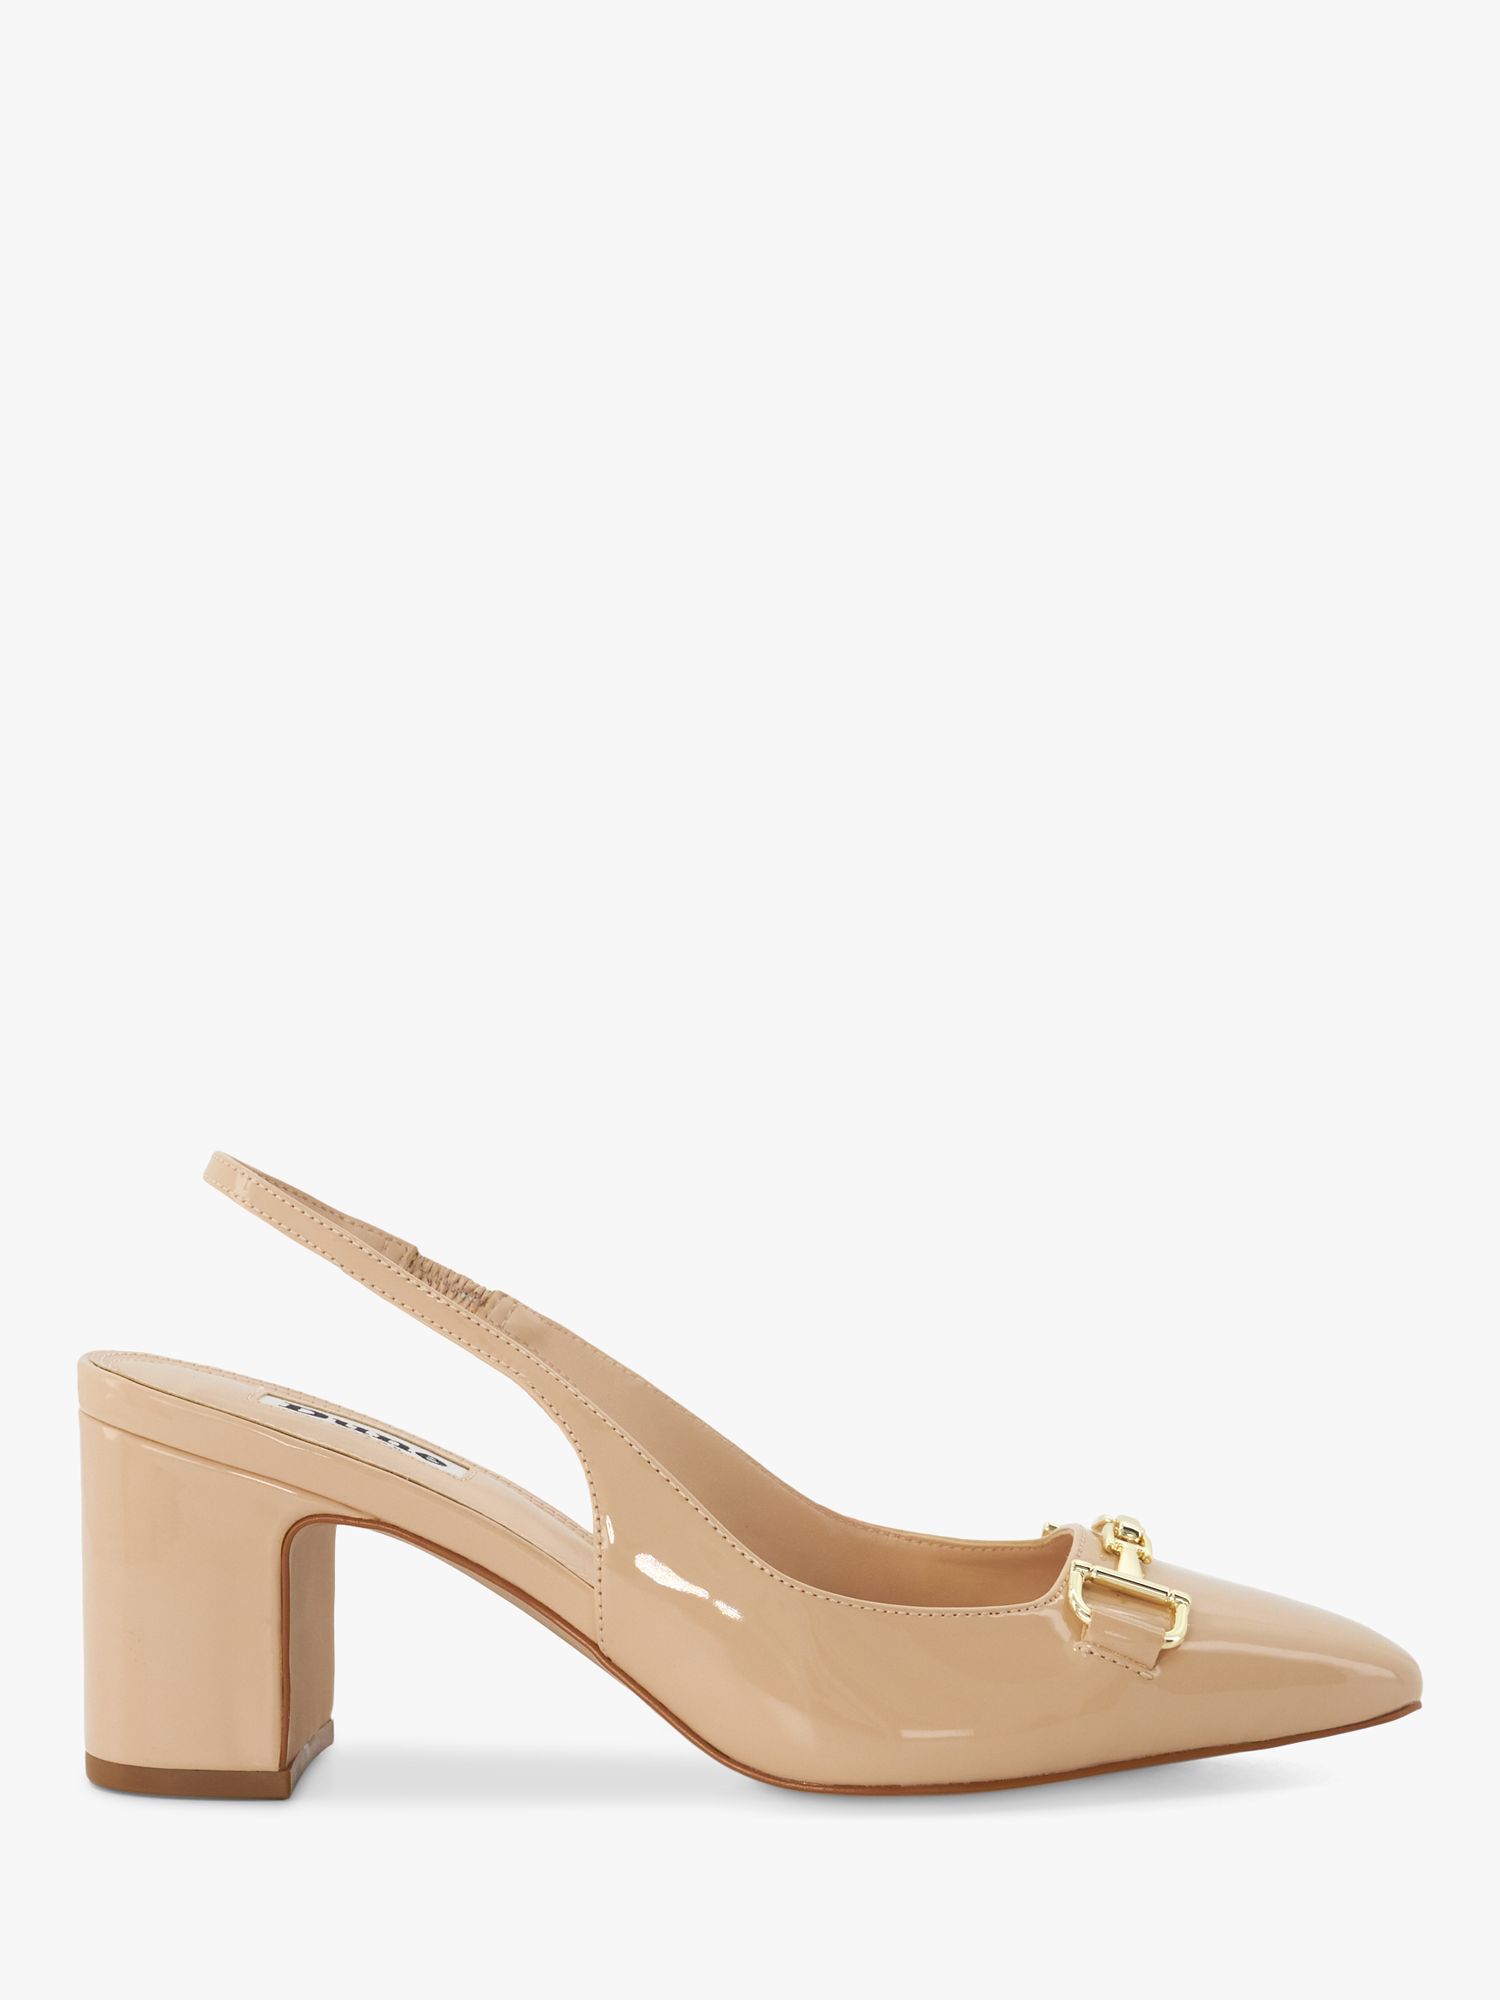 Buy Dune Wide Fit Detailed Court Shoes, Blush Patent Online at johnlewis.com